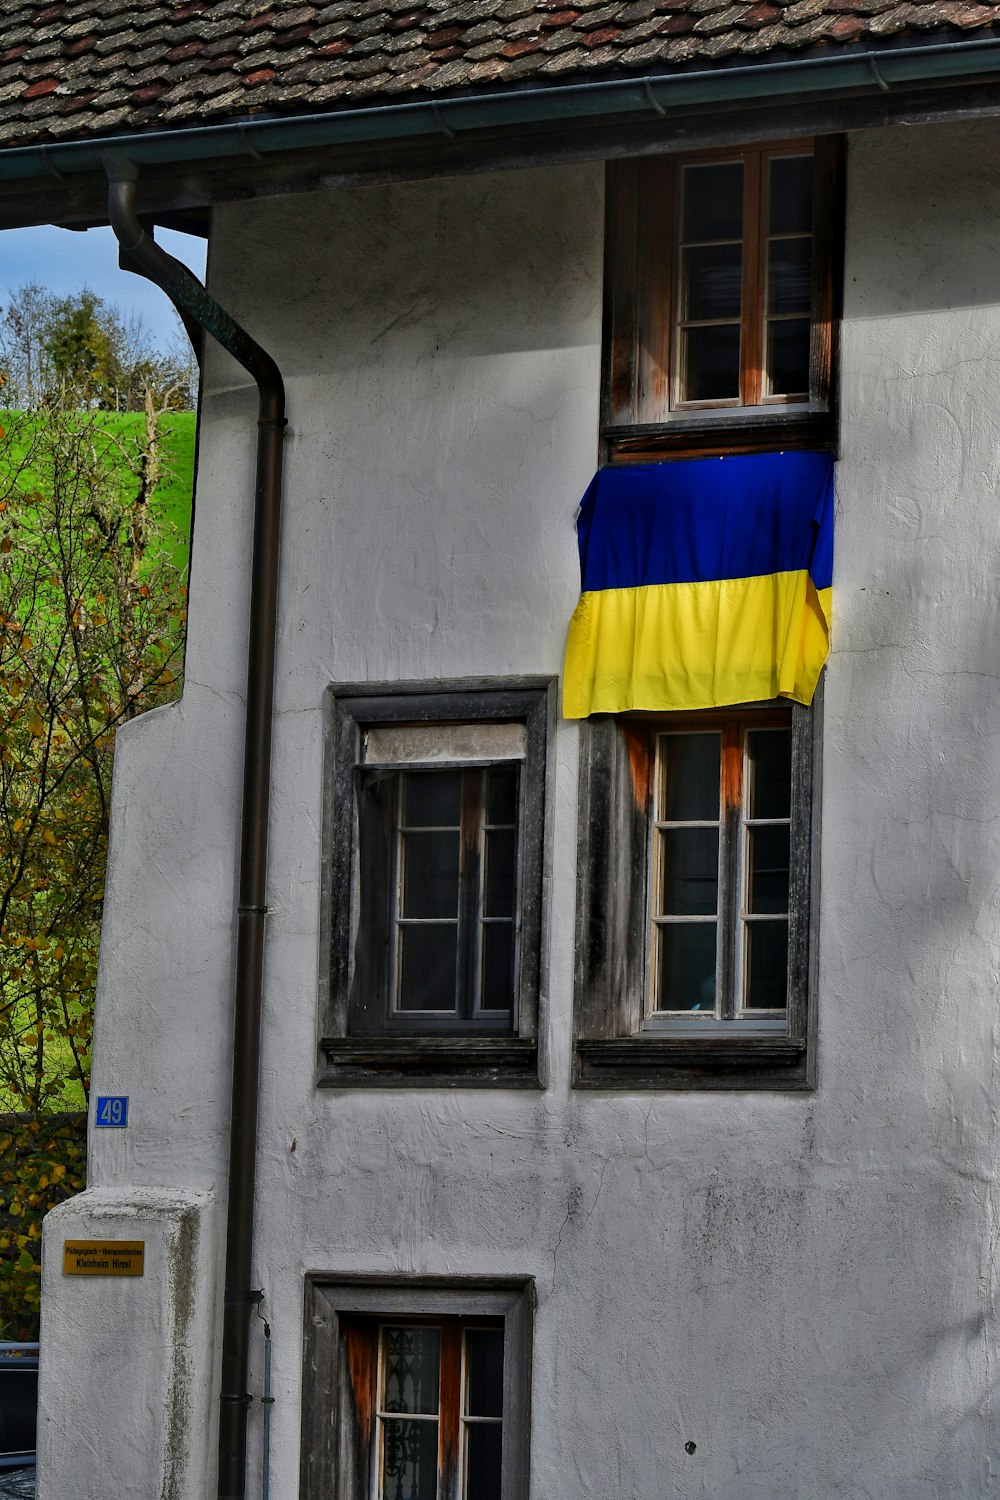 a flag from a building